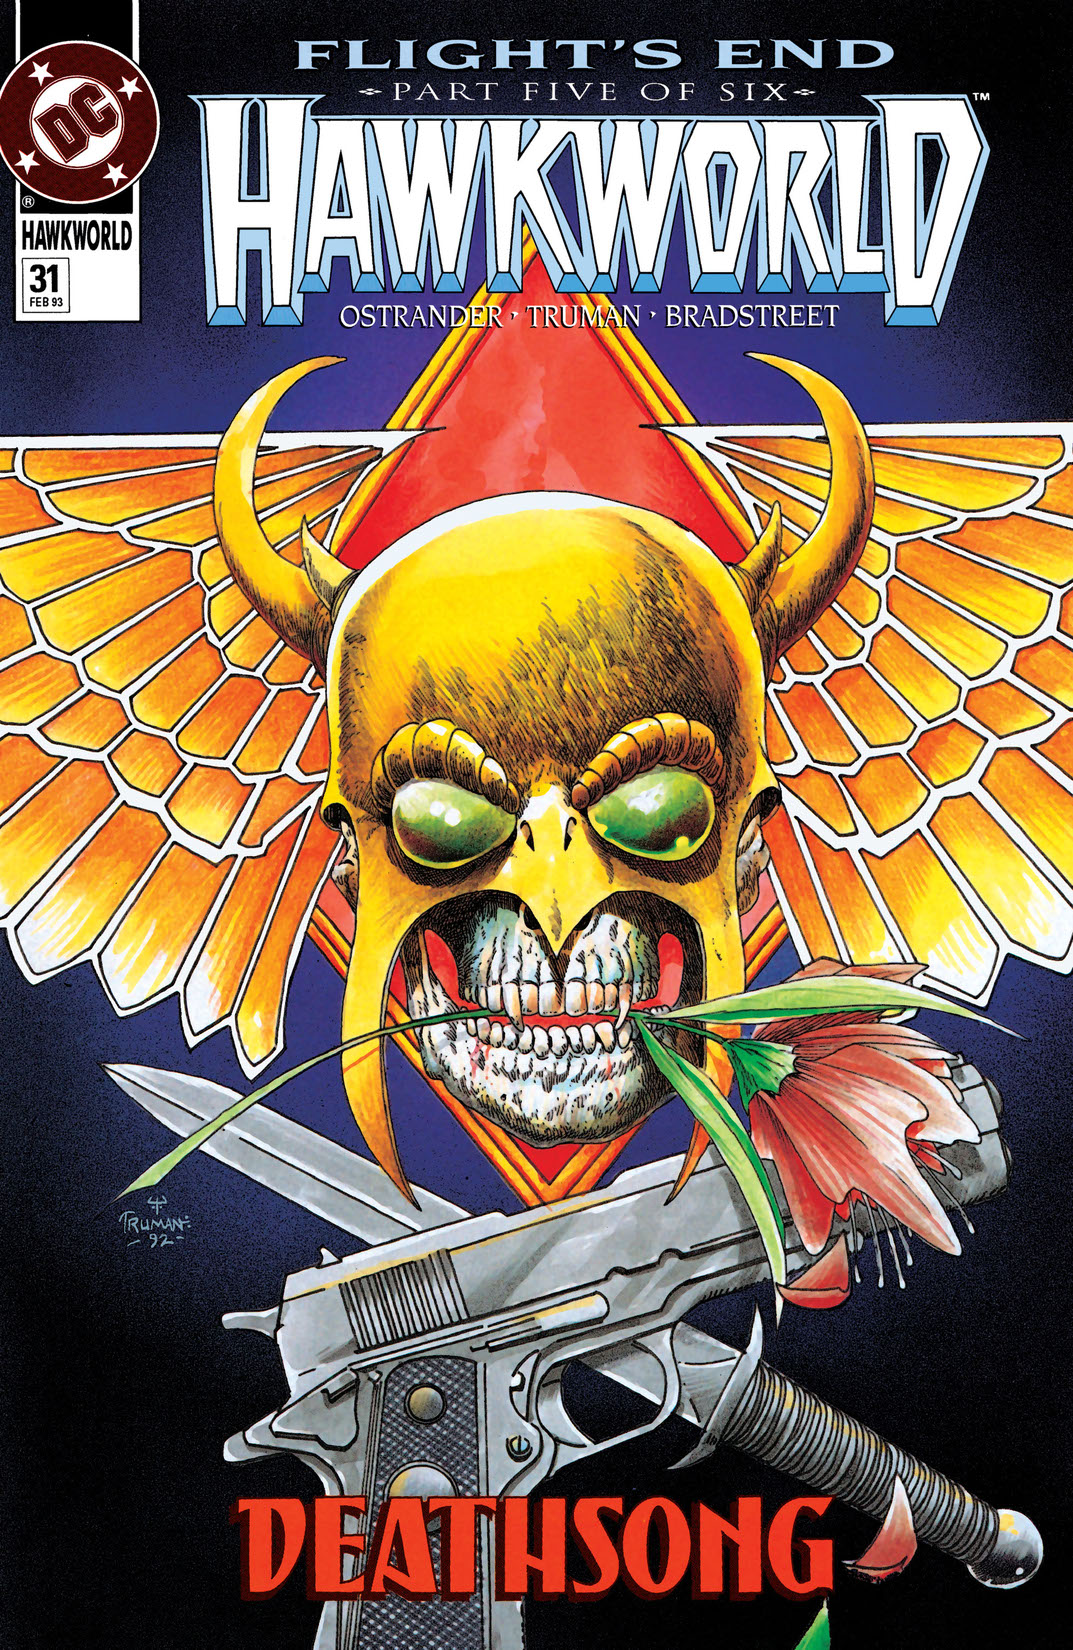 Hawkworld (1989-) #31 preview images